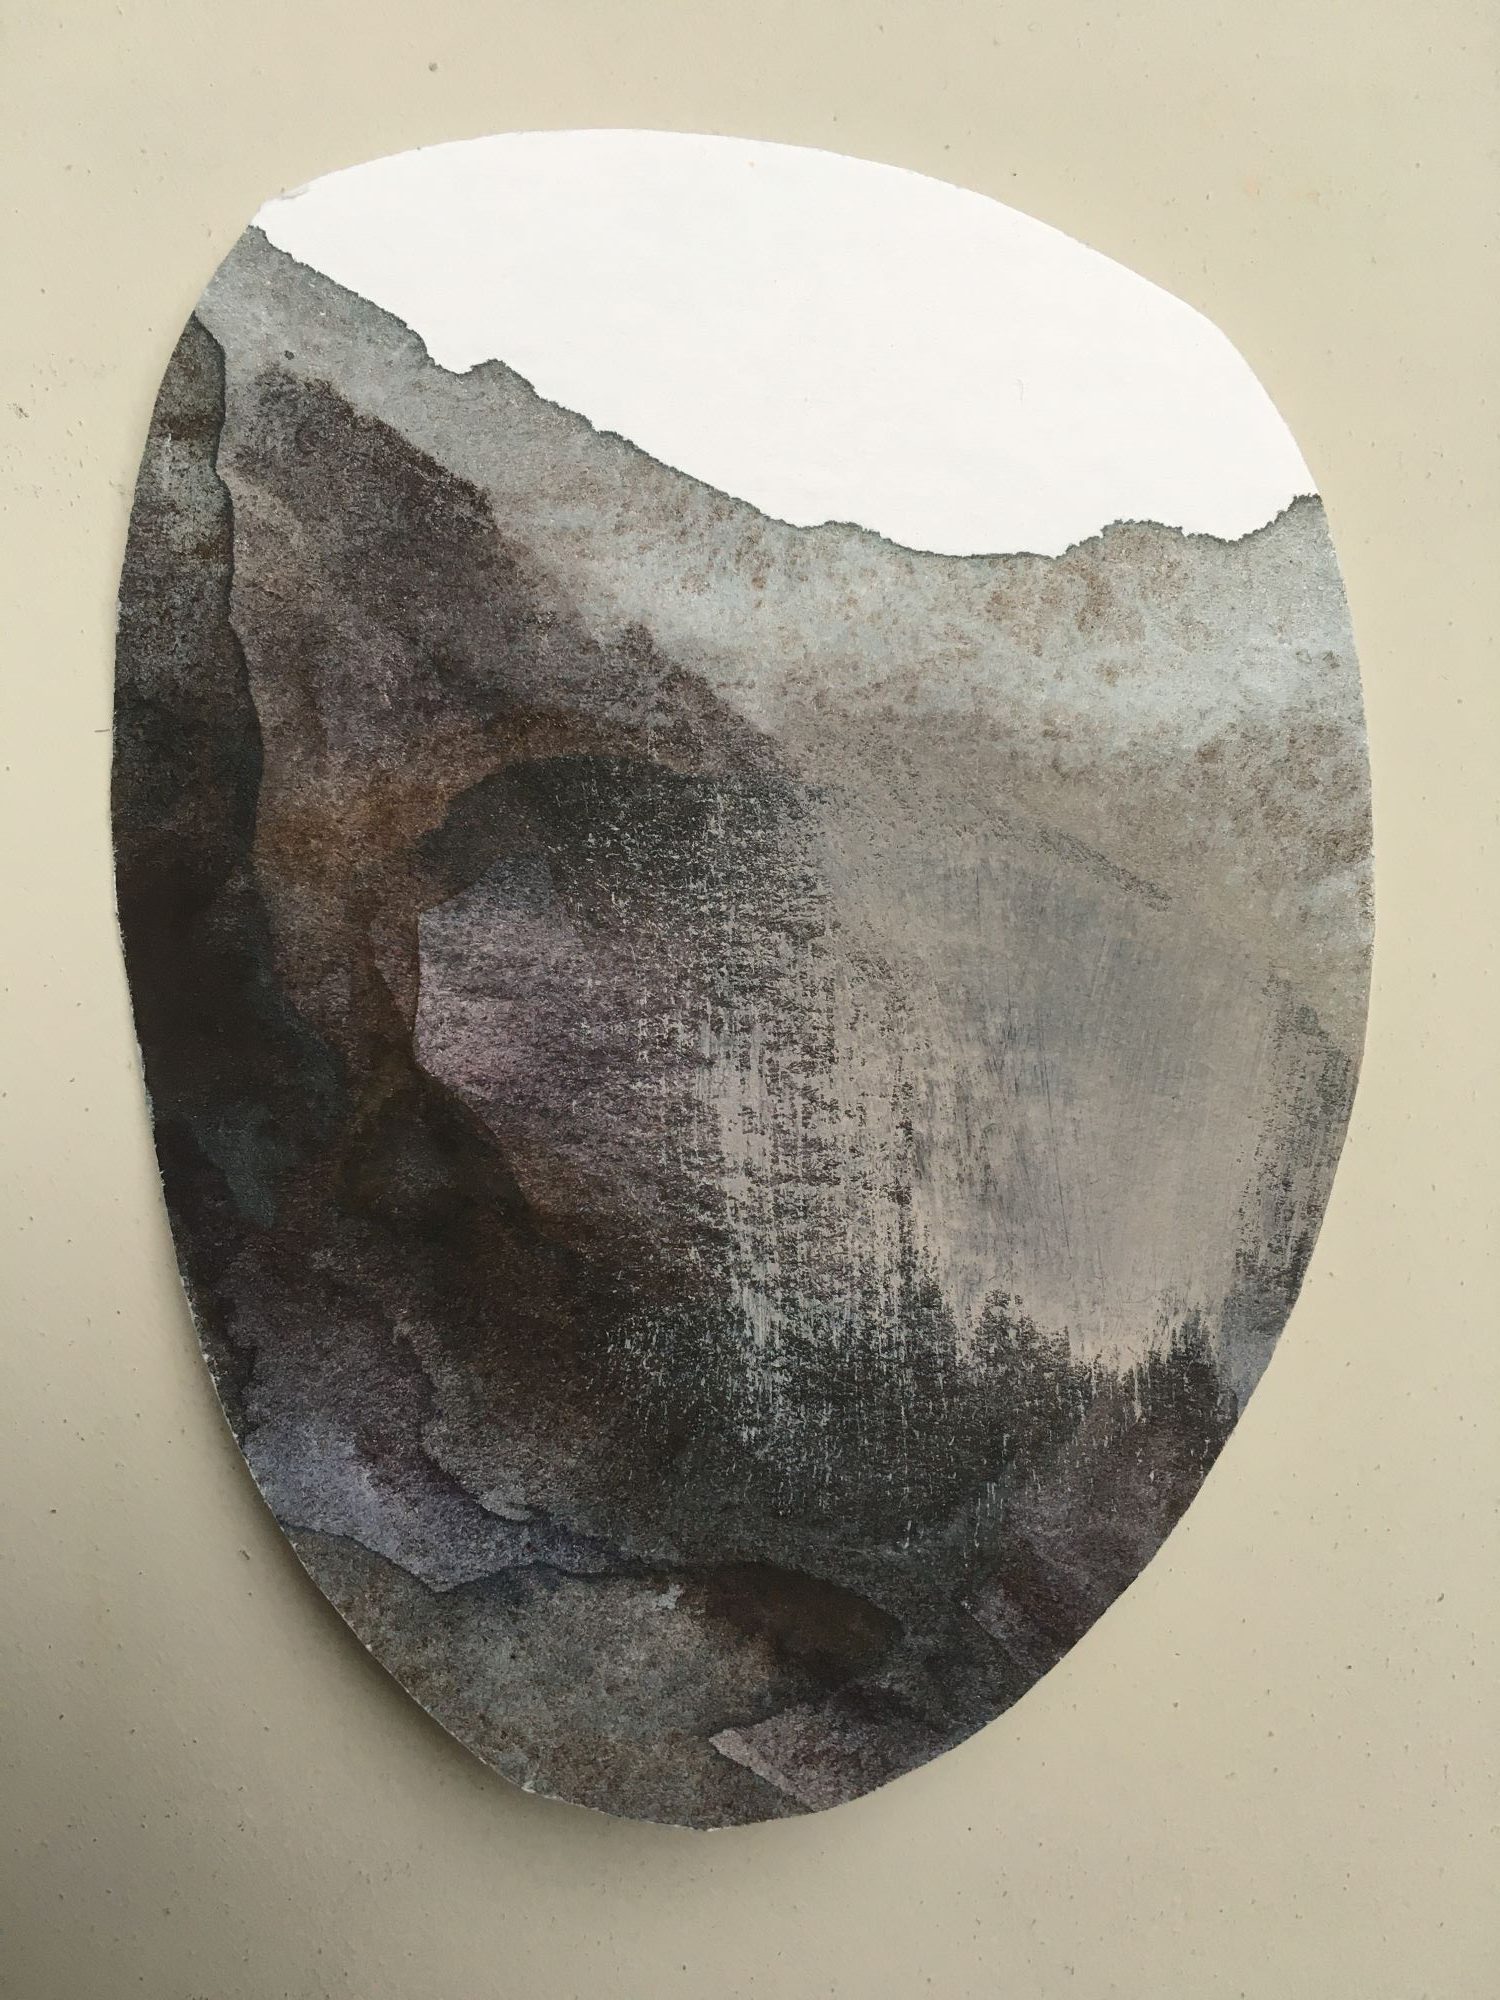 Morag Thomson Merriman, The Wound Within, emotional landscape, Fading Series, 12x7.5cms 2022